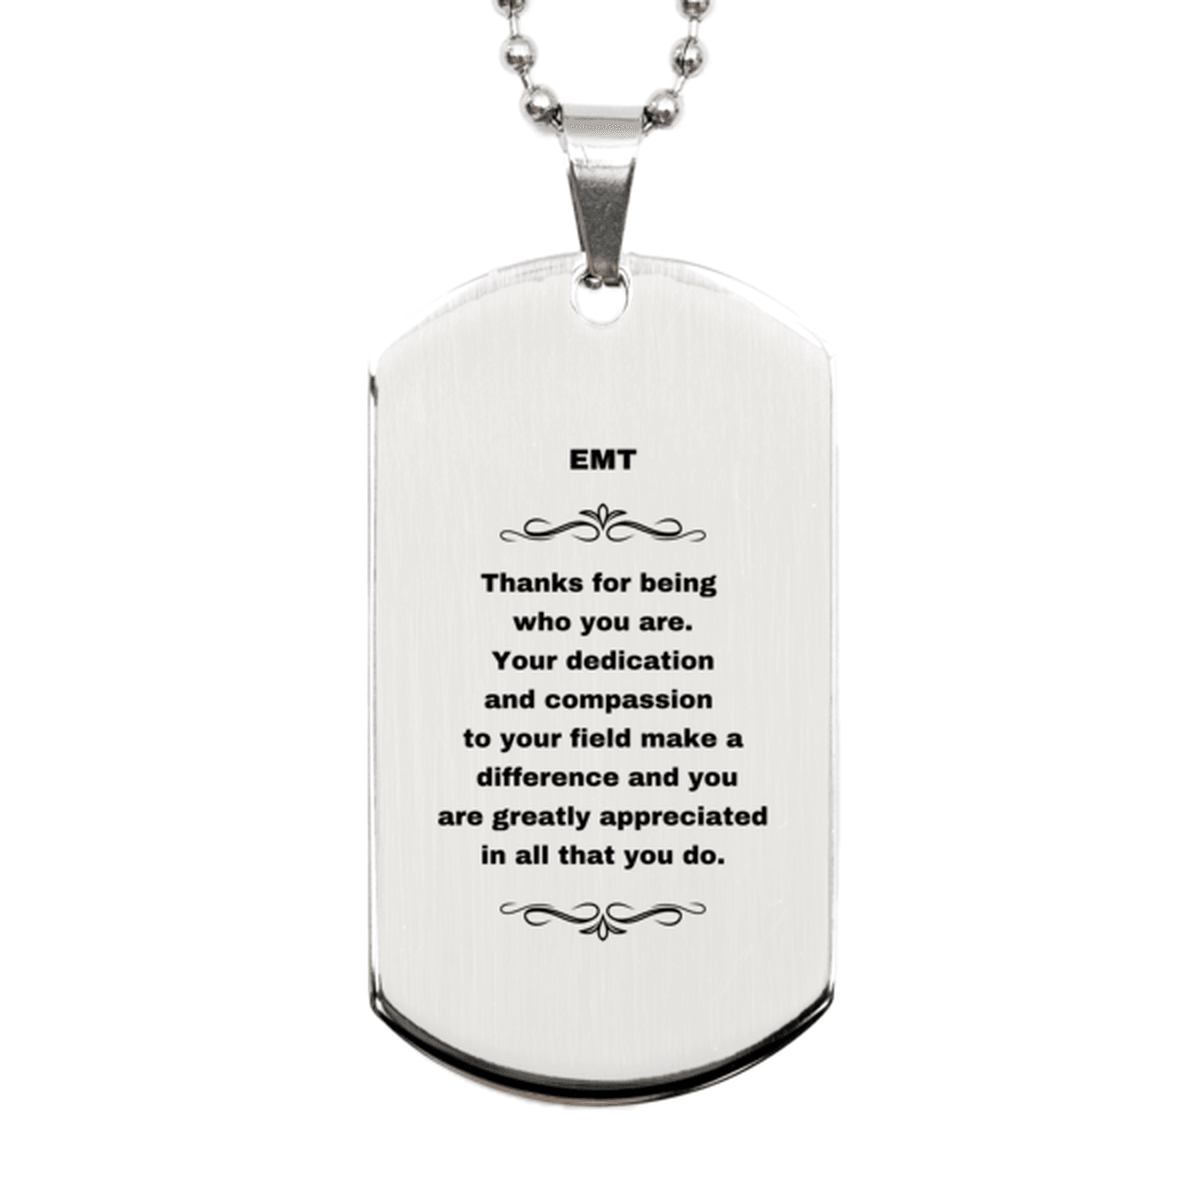 EMT Silver Dog Tag Necklace Engraved Bracelet - Thanks for being who you are - Birthday Christmas Jewelry Gifts Coworkers Colleague Boss - Mallard Moon Gift Shop